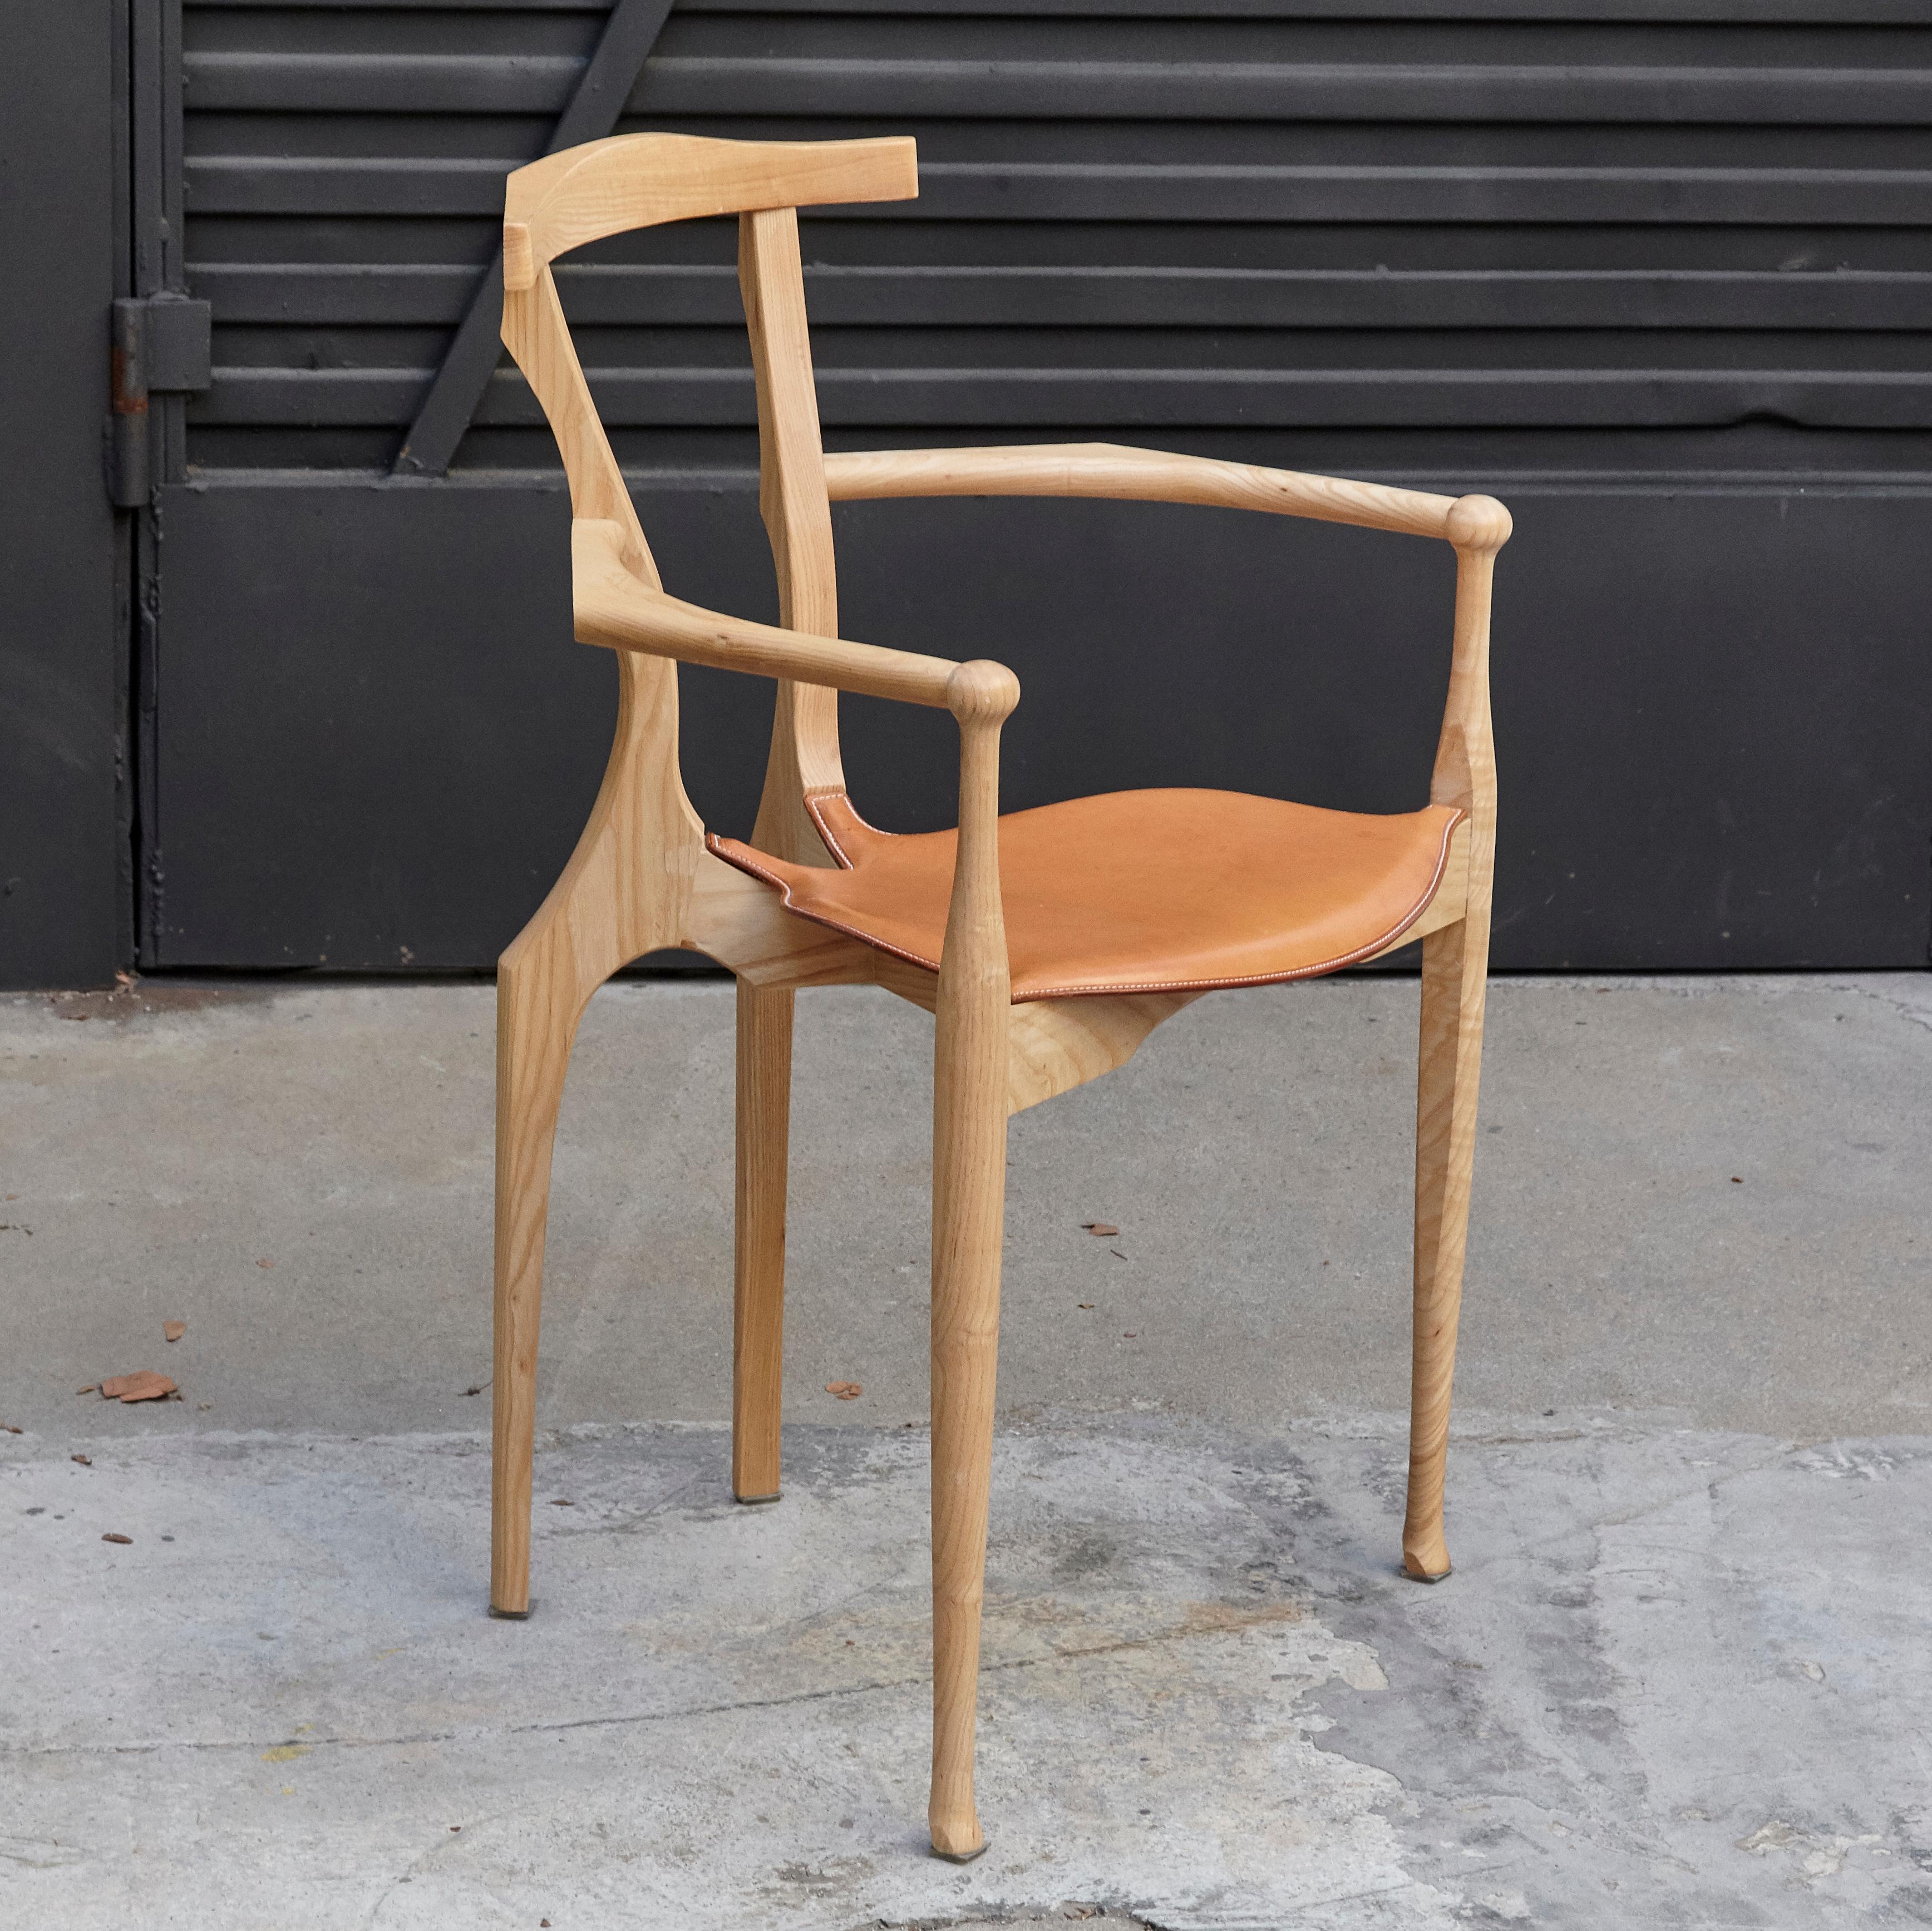 Gaulino chair designed by Oscar tusquets manufactured by BD Barcelona.

Solid natural varnished ash with seat in natural hide.